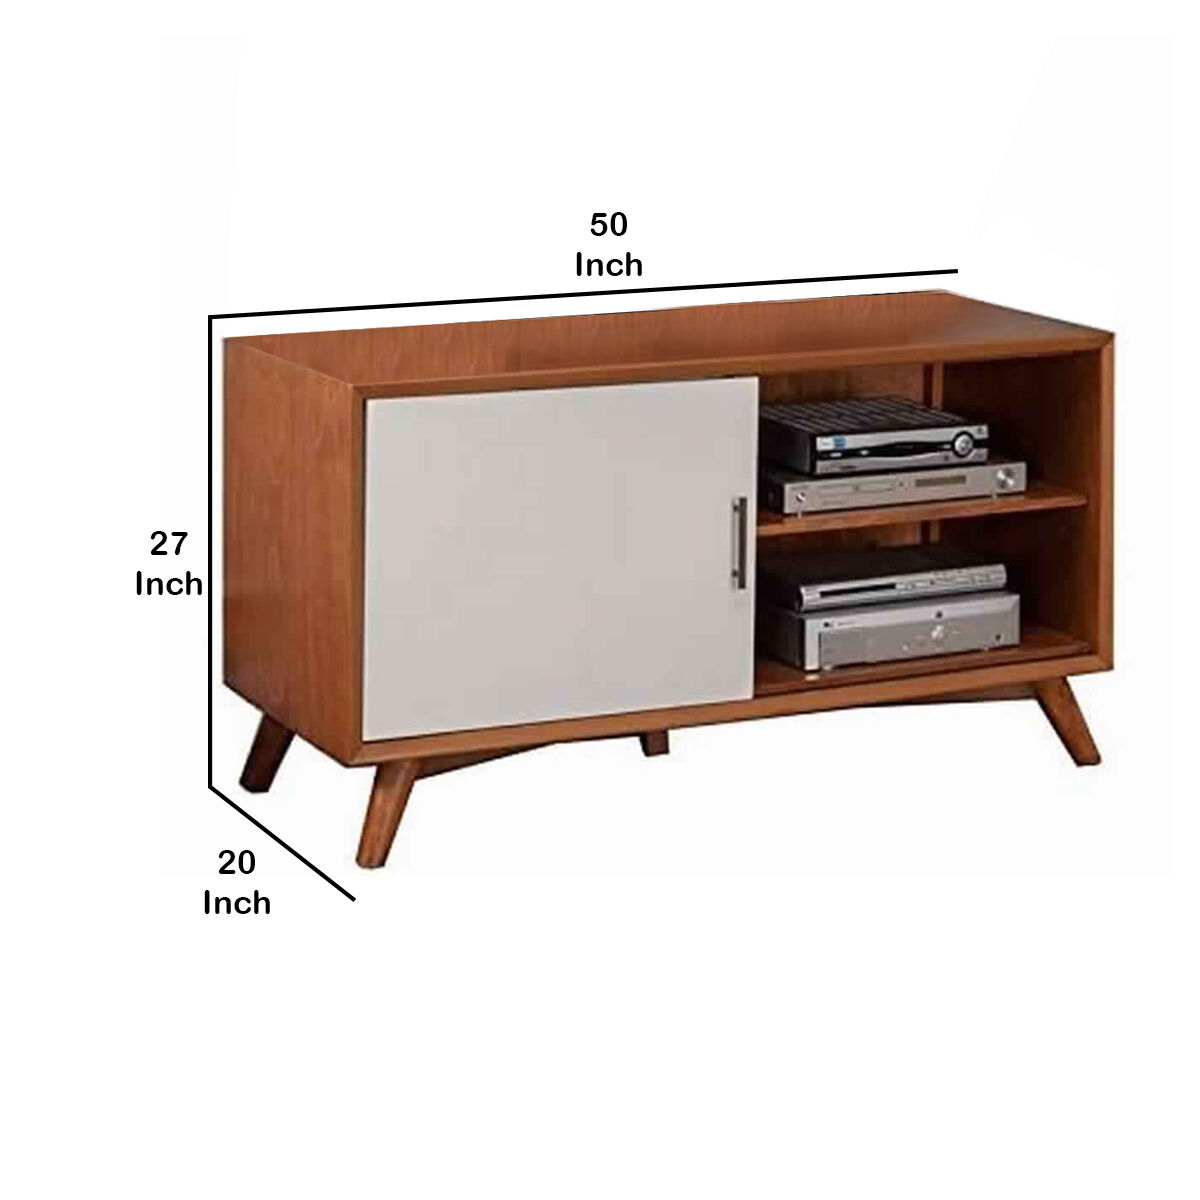 Wooden TV Console with 3 Drawers and 1 Covered Shelf, Brown and White